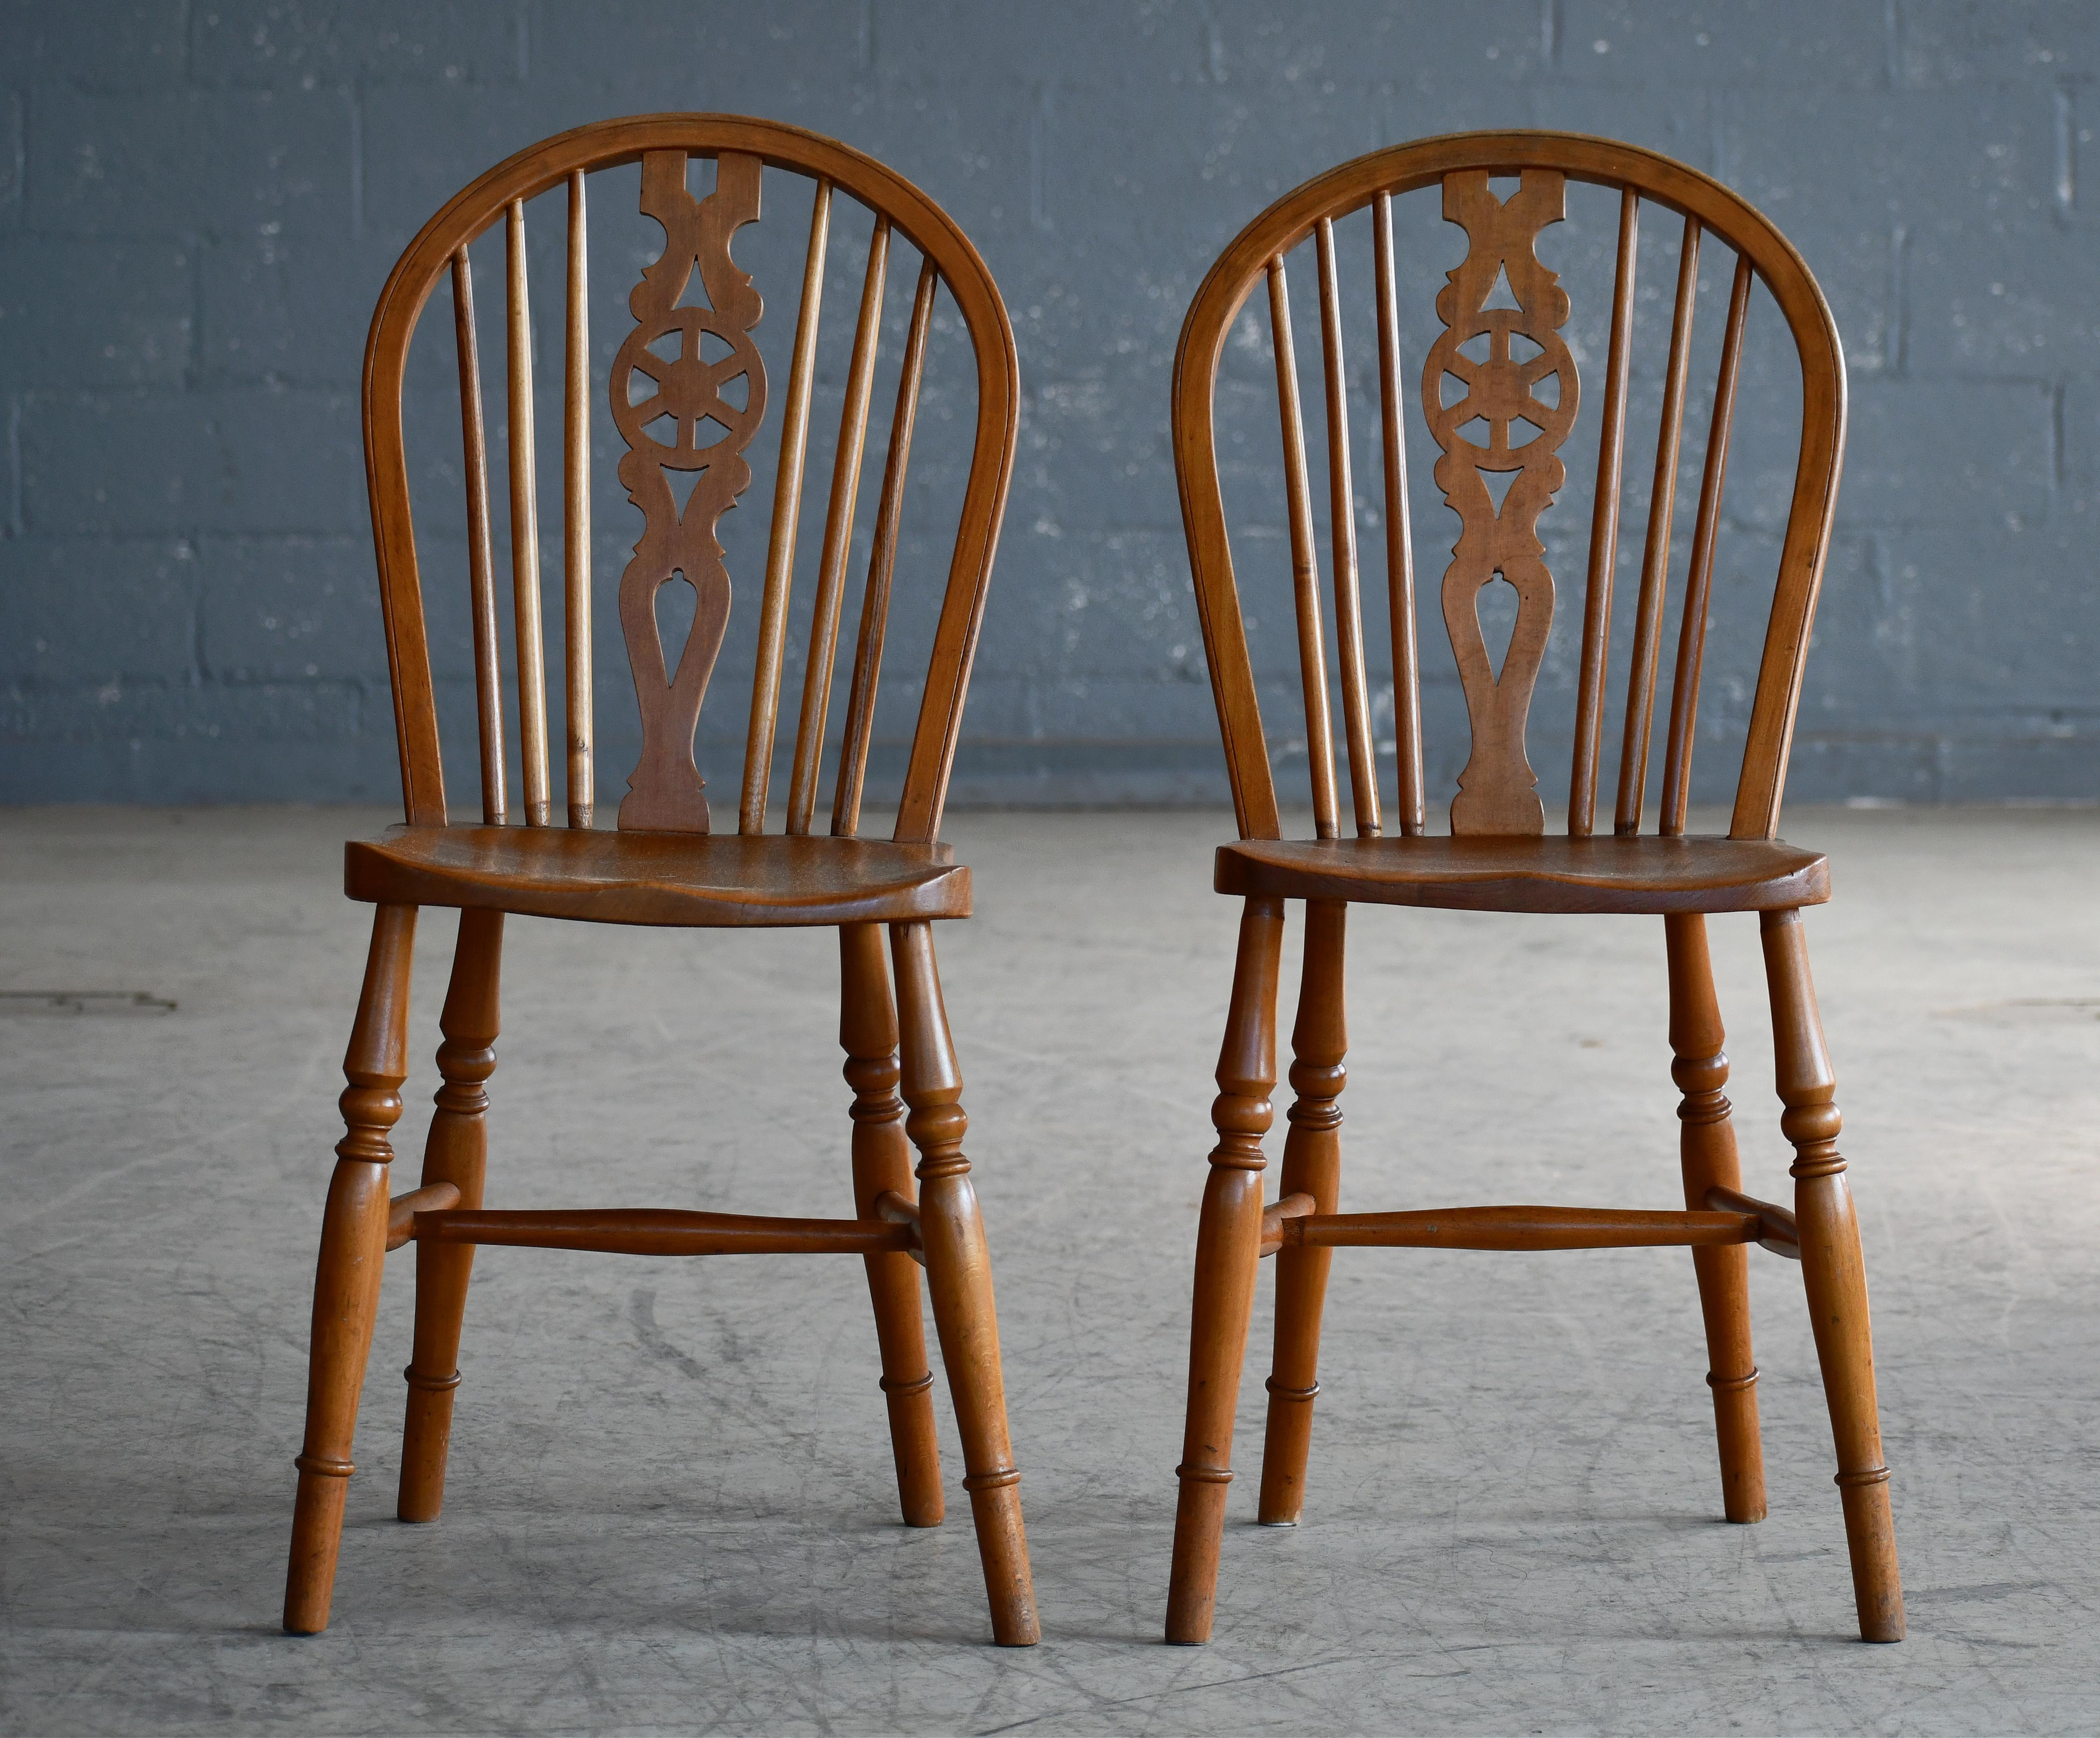 Beech Set of Ten Danish Windsor Style Dining Chairs, Early to Mid-1900s For Sale